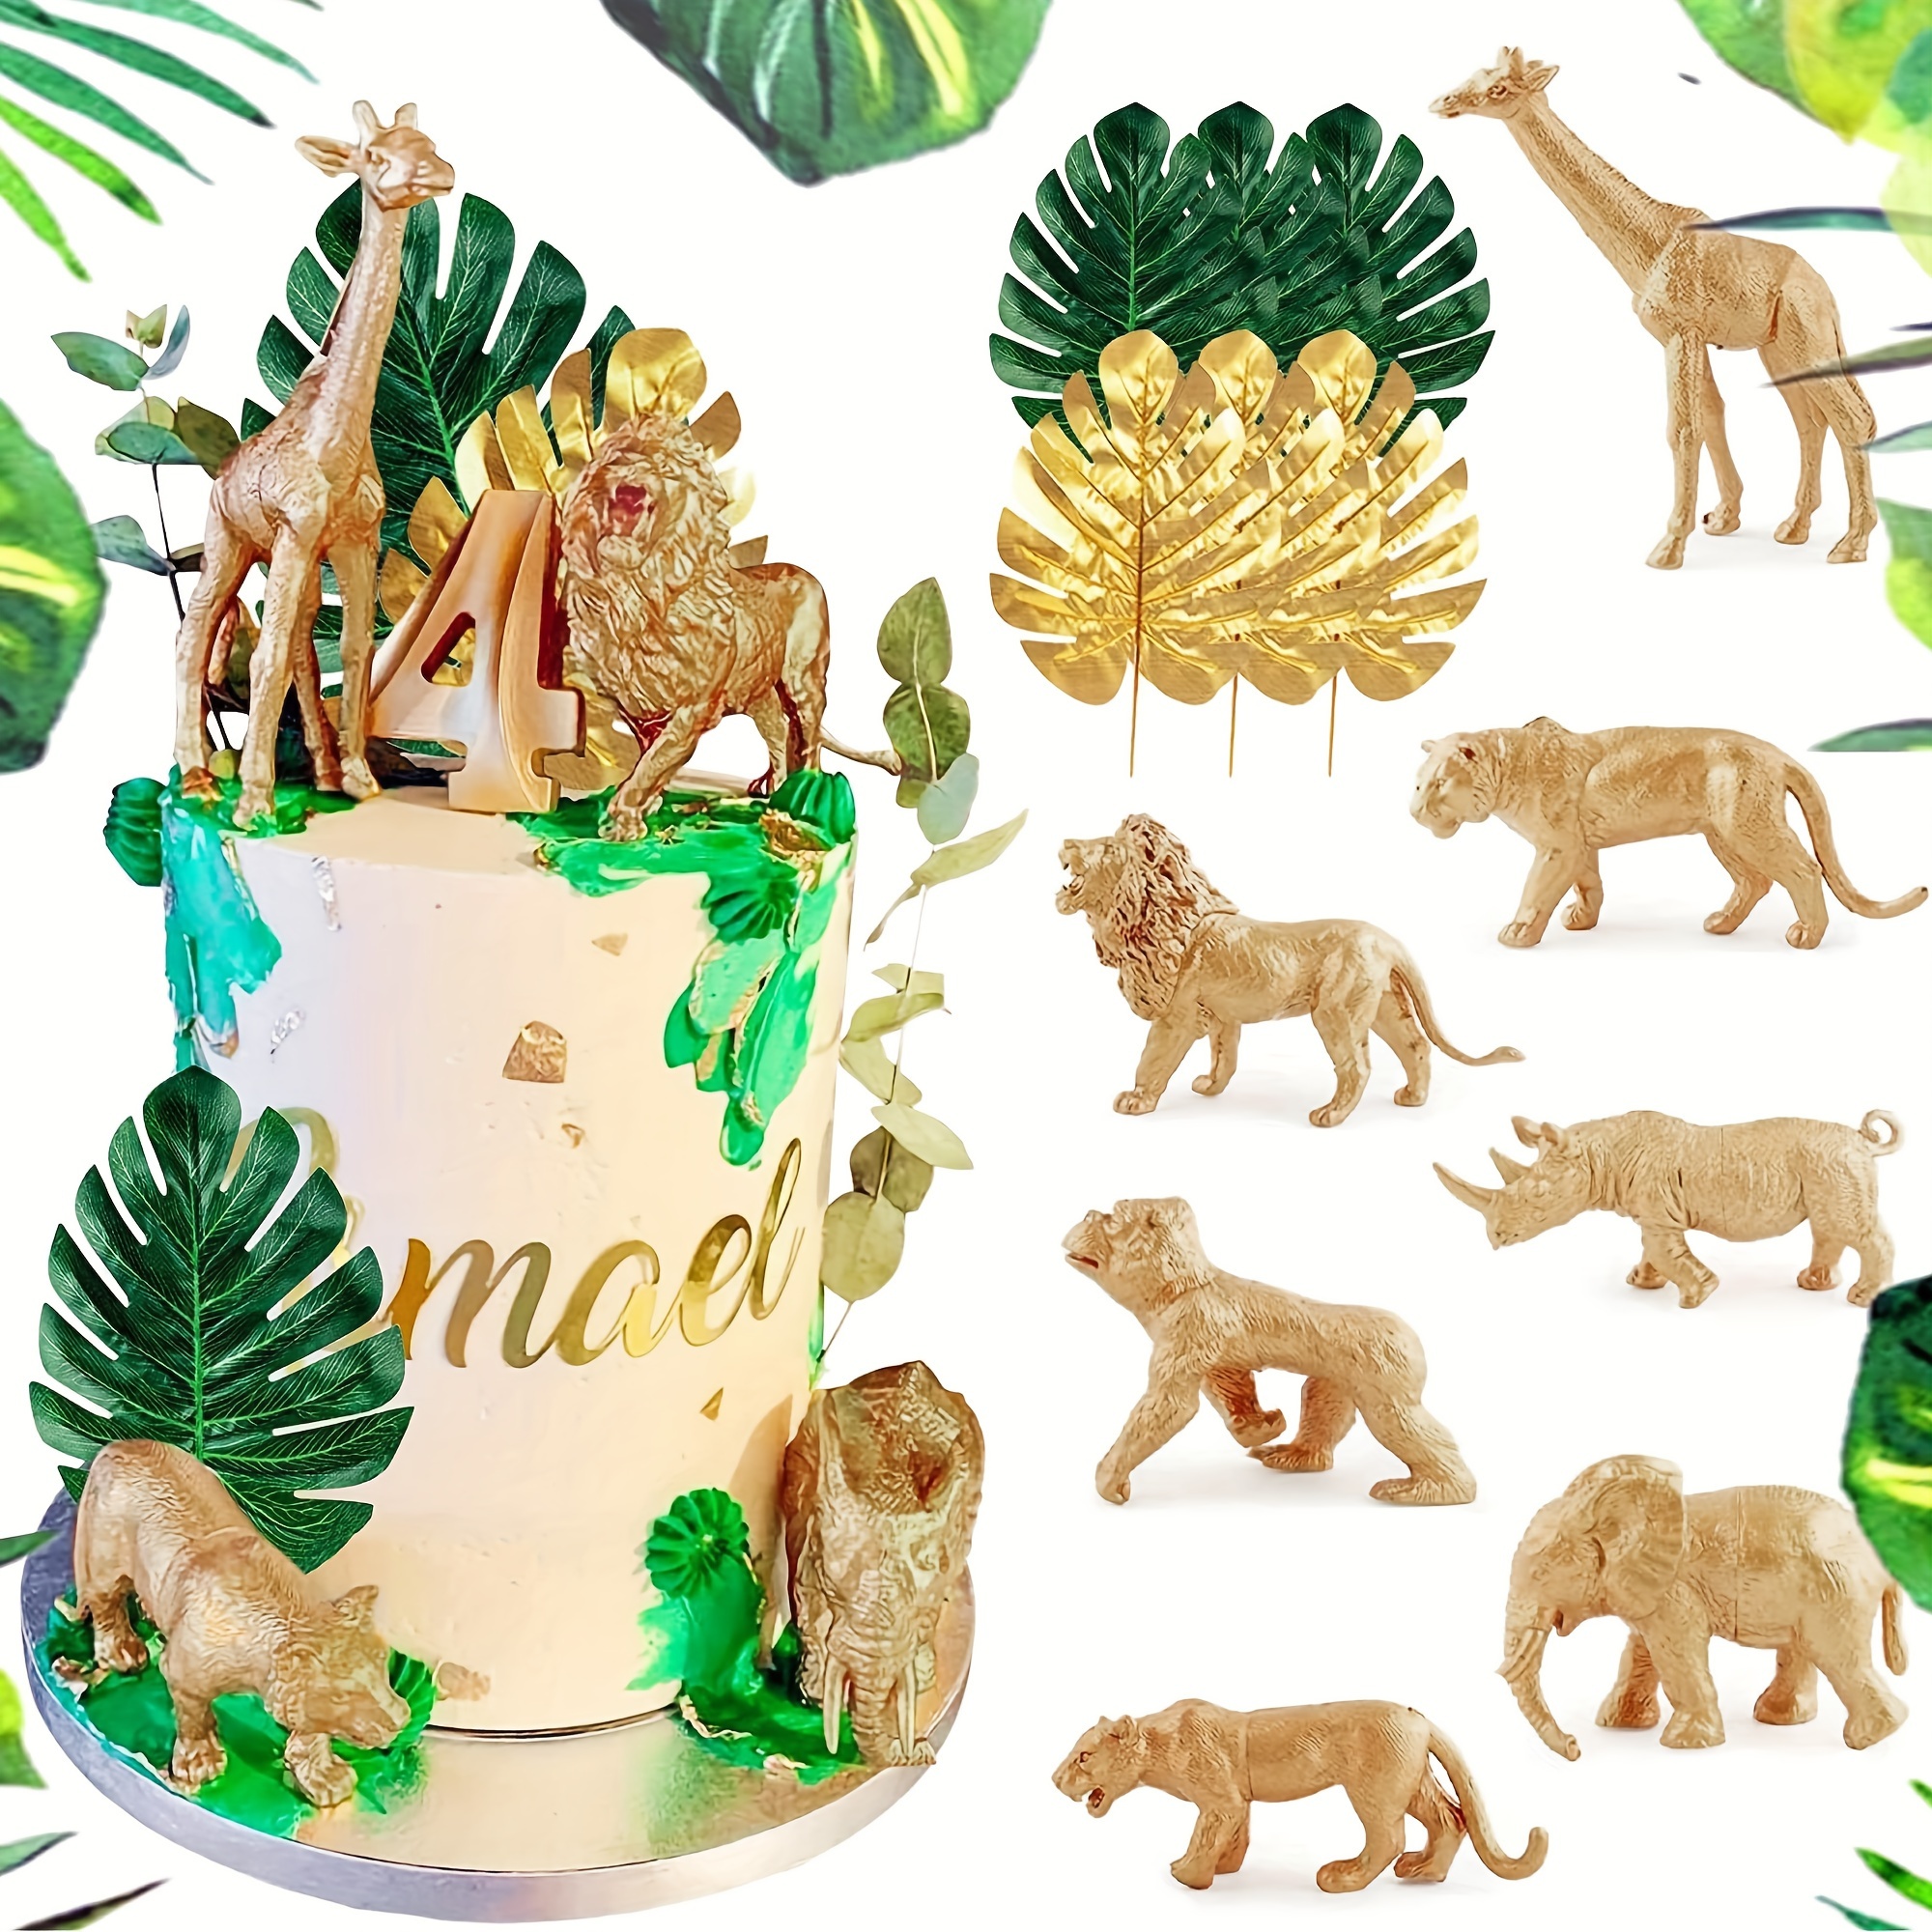 

Jungle Safari Animal Cake Toppers Set Of 13pcs - Plastic Birthday Cake Decoration Supplies, Universal Holiday Use, No Electricity Required, Featherless - Perfect For Any Occasion Cake Decor